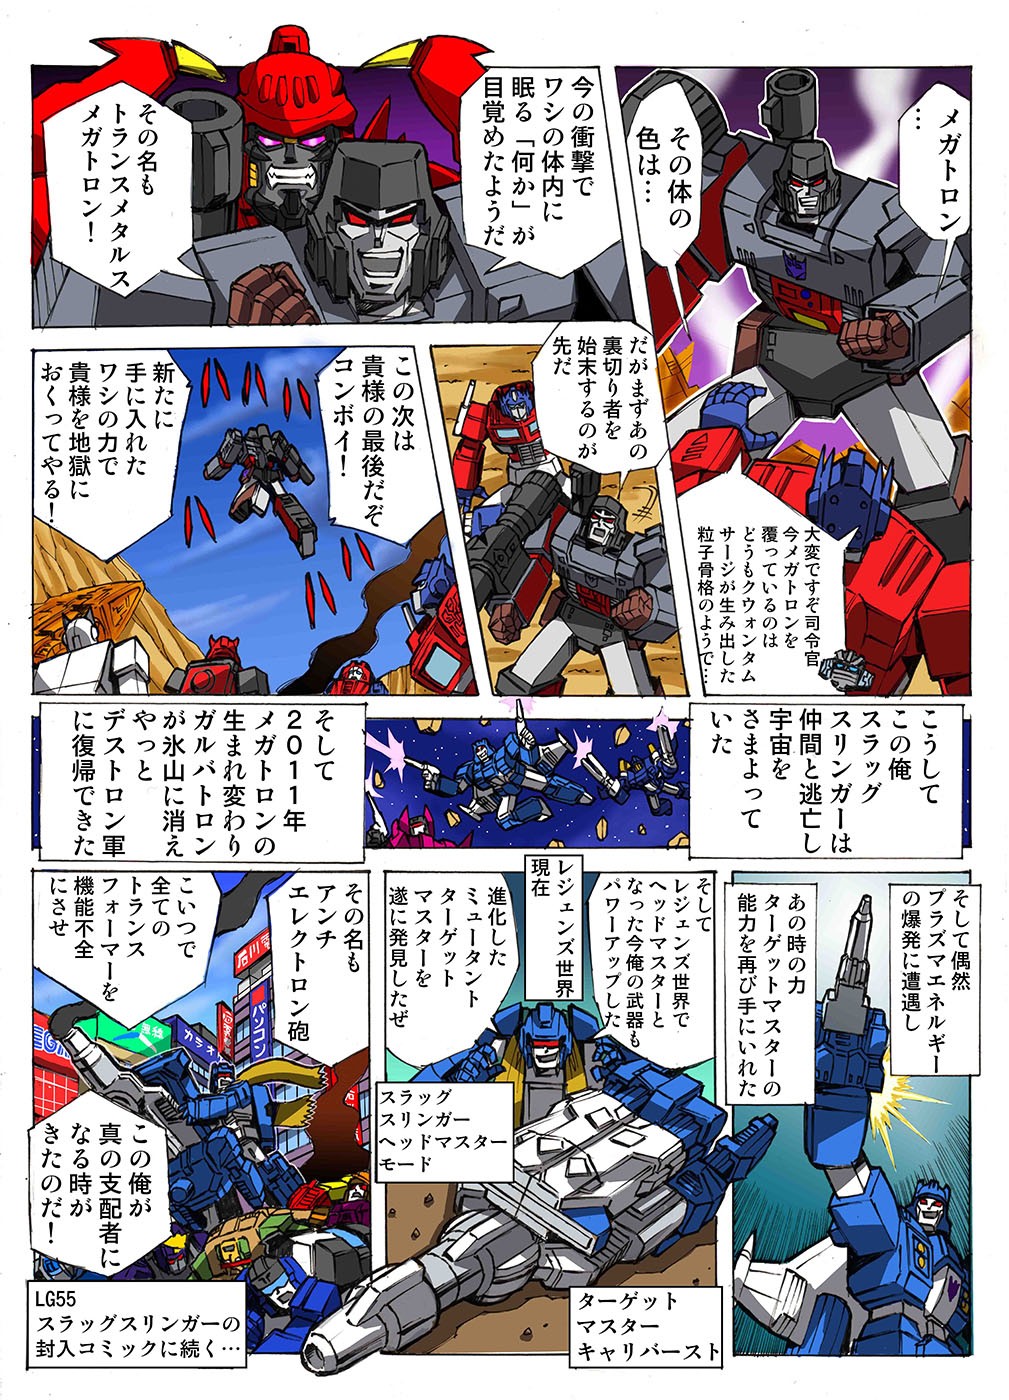 Transformers News: Chapter 49 of Takara Tomy Transformers Legends Manga Now Online